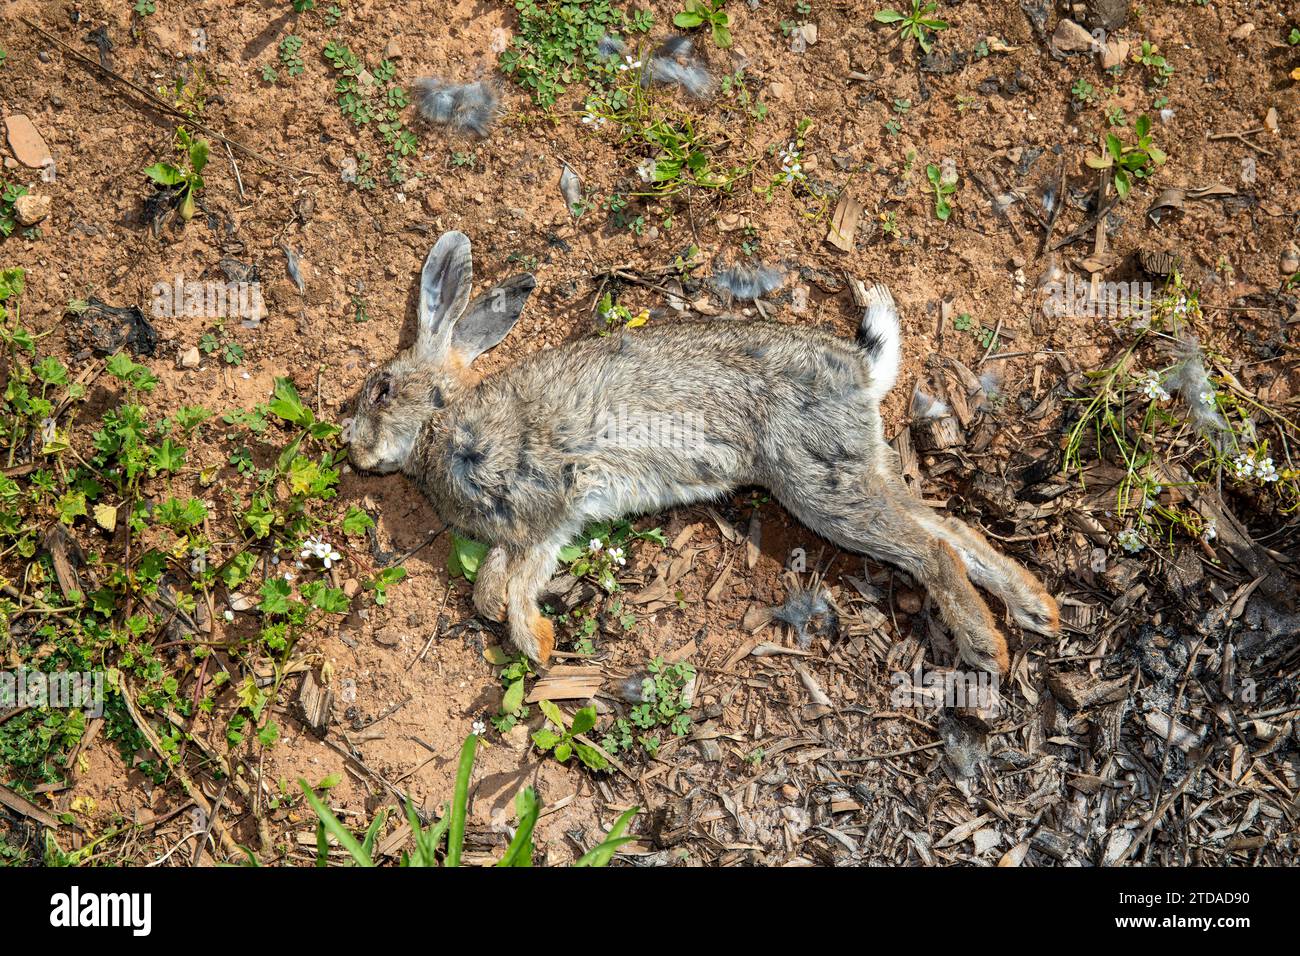 Life and Death in the Wild: Dead Hare Lying in Field - Wildlife Traged Stock Photo